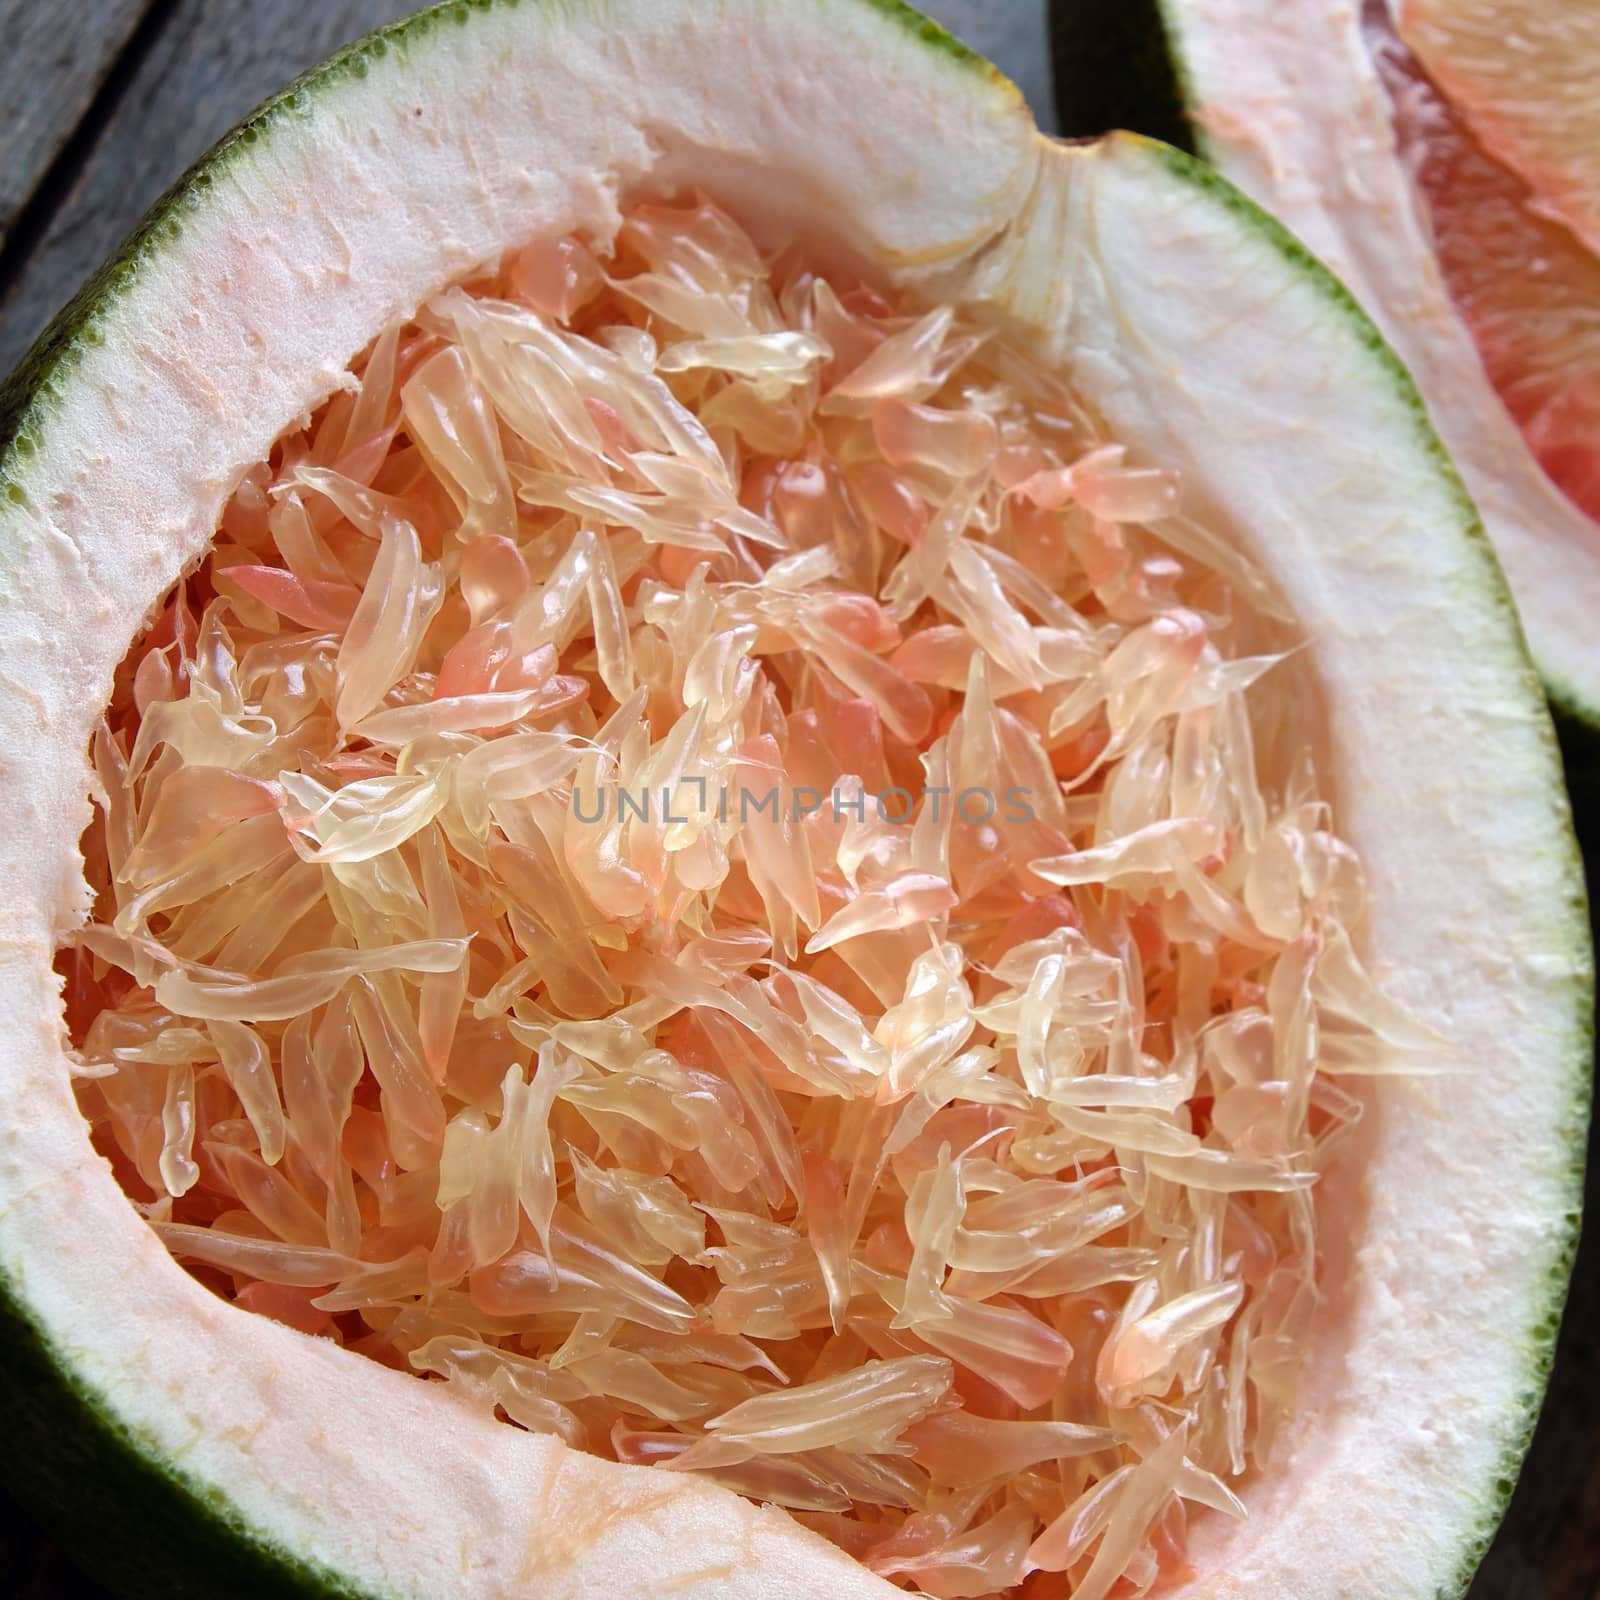 Grapefruit on wood background, tropical fruit, Vietnamese agriculture product, rich vitamin A, healthy eating, reduce cholesterol, prevent kidney stones, oxidation, anti cancer, make lose weight